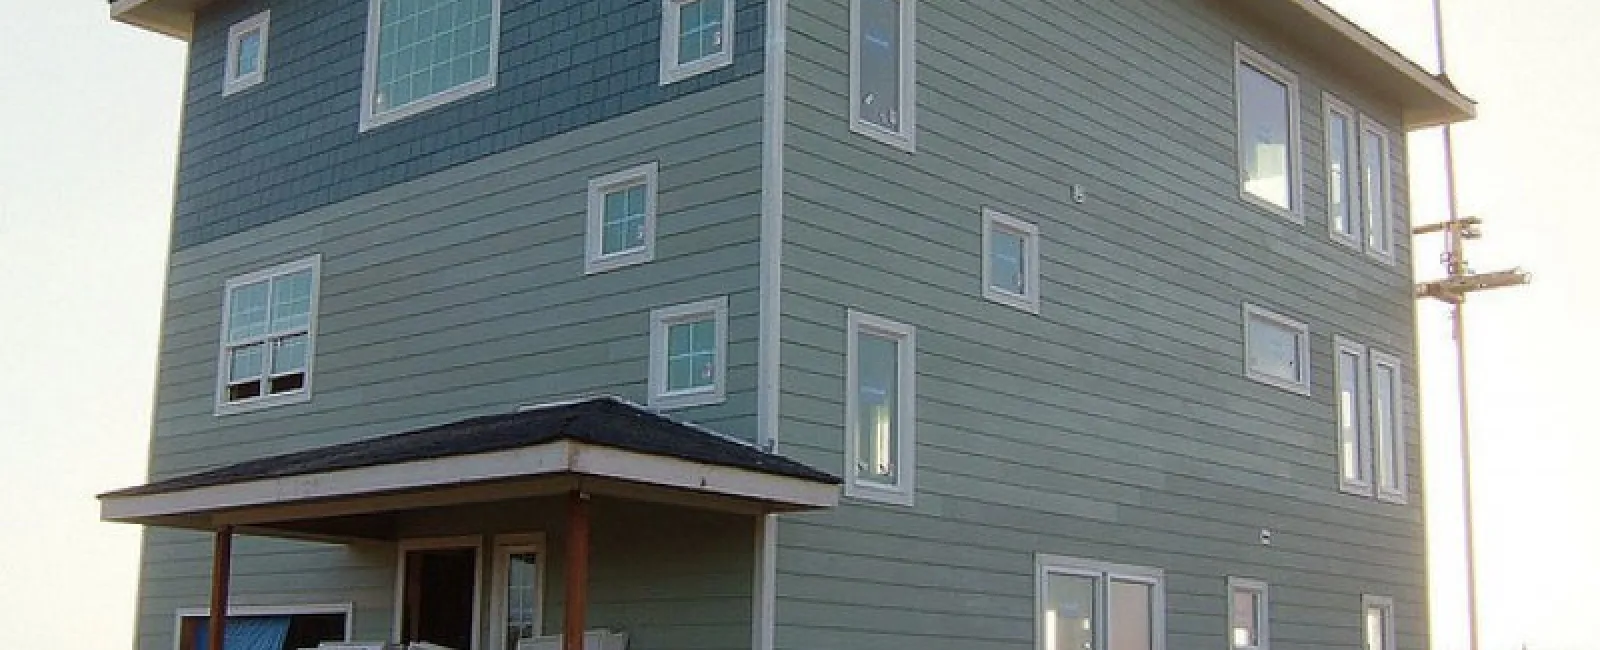 Siding materials: Pros and cons of popular siding types